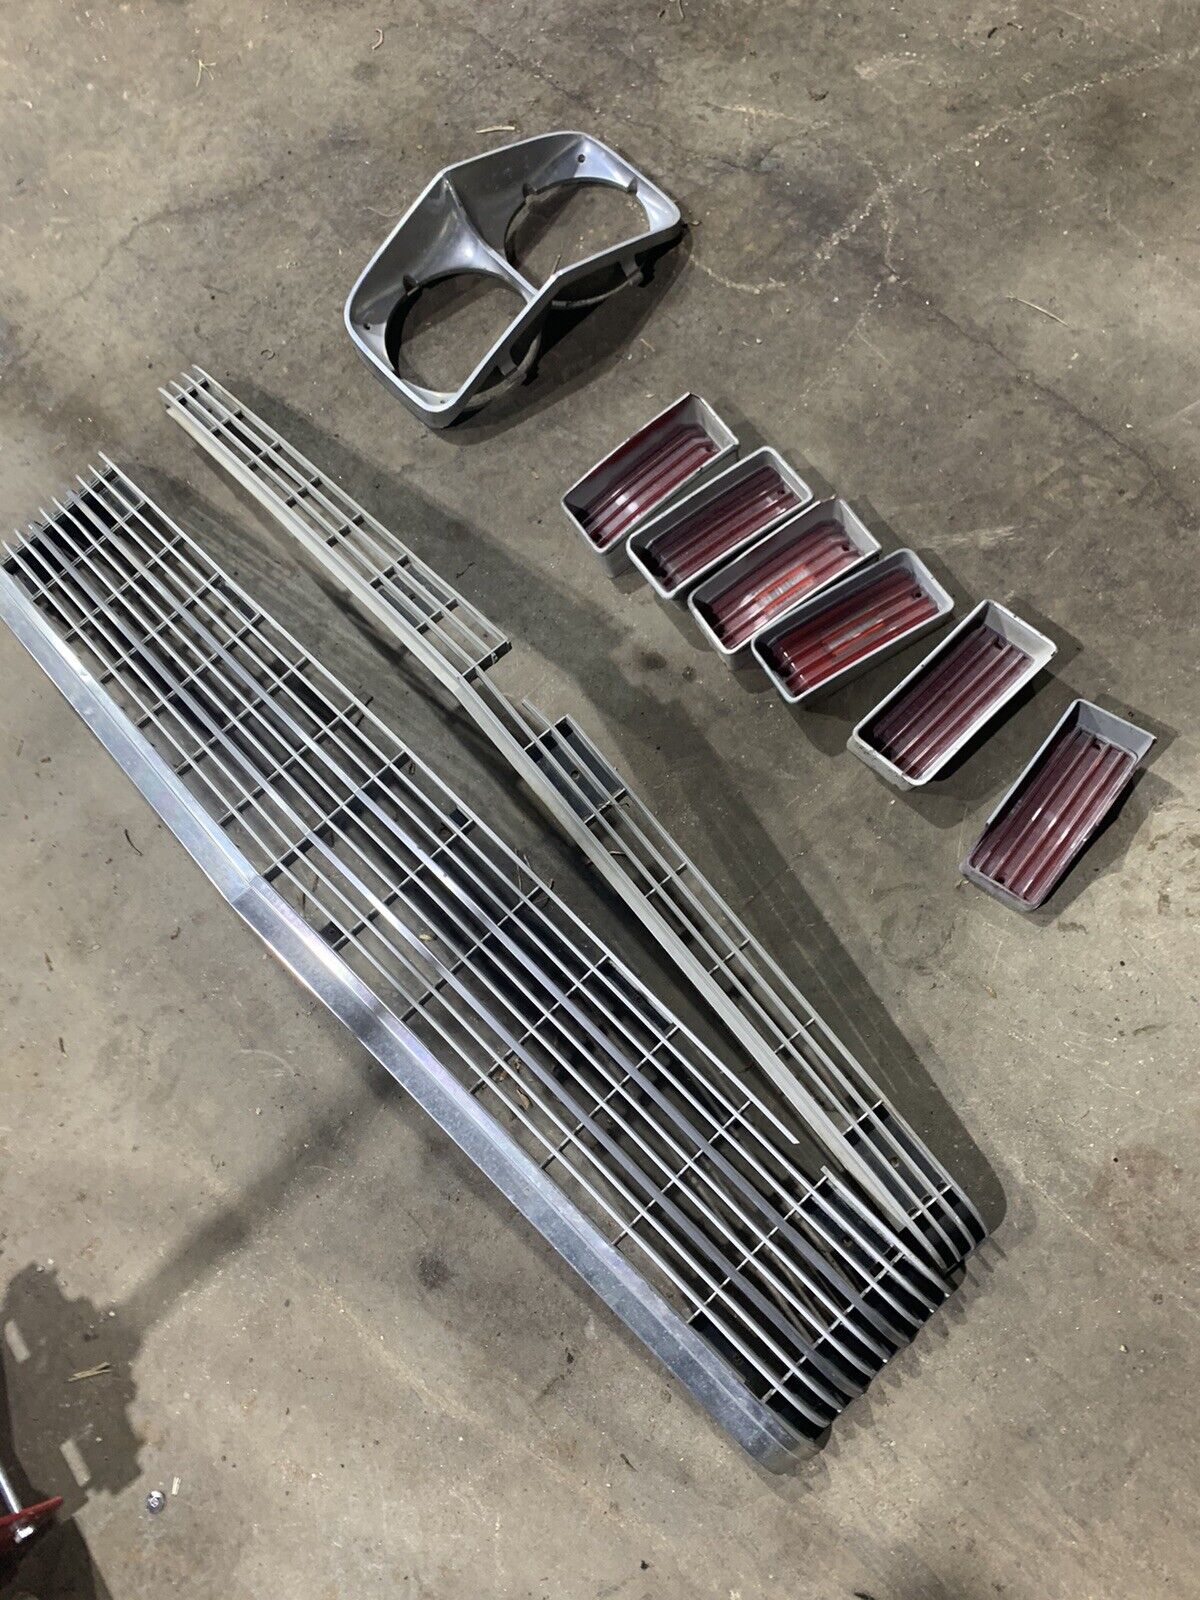 1970 Chevy Impala grille Chevrolet grill Bel Air Biscayne 